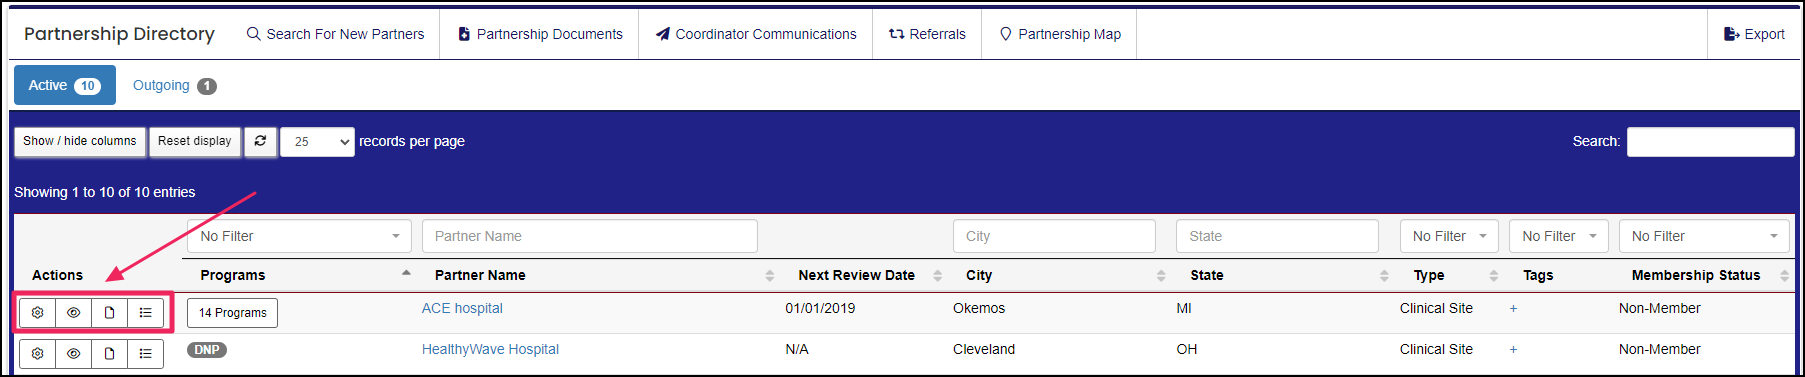 Image shows partnership directory buttons under actions column.